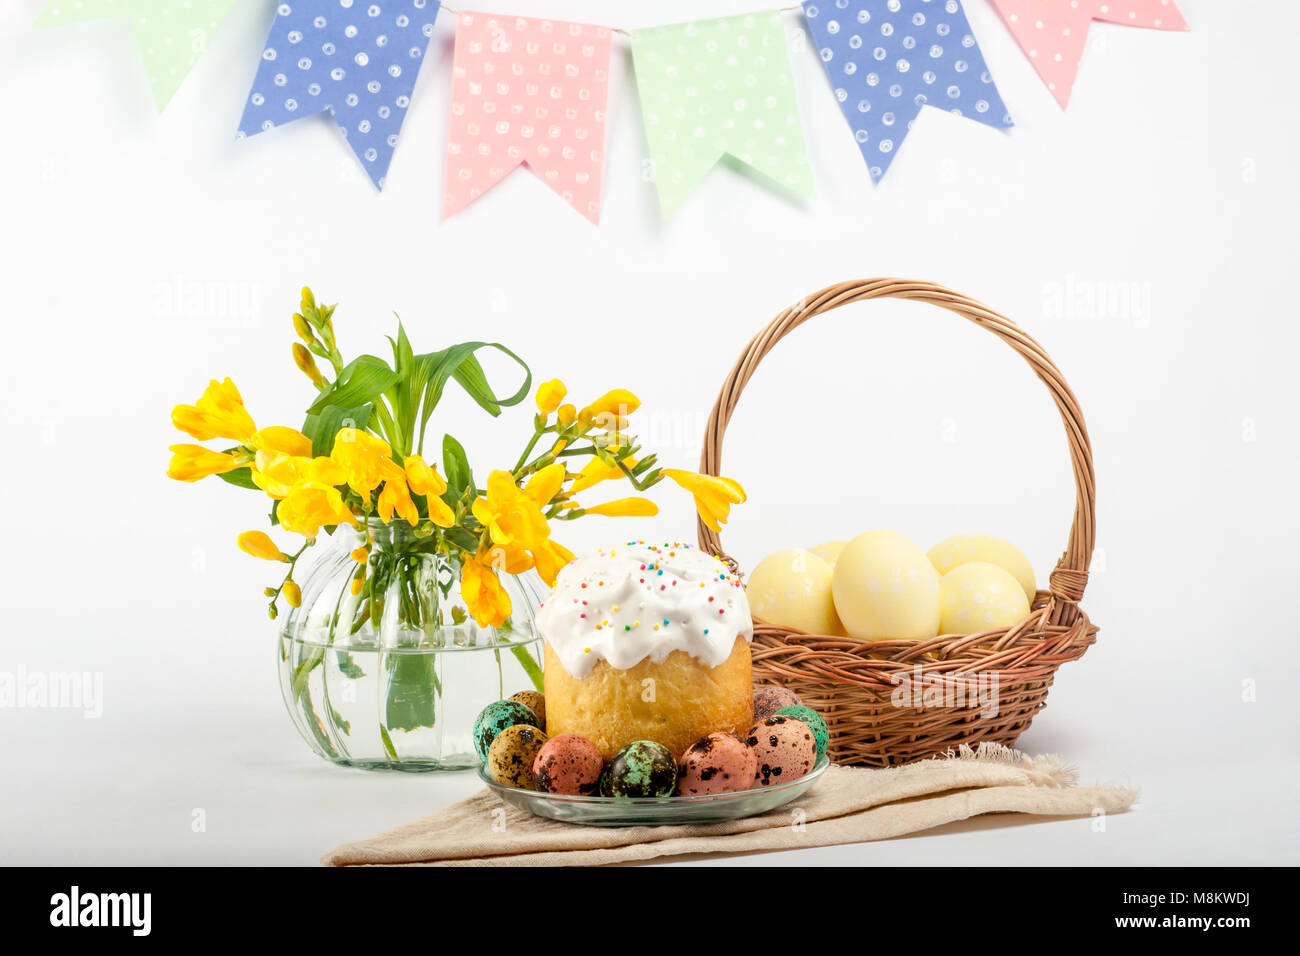 Sweet pastries for Easter. Festive pastry. Beautiful still lifes with baking. Easter. Stock Photo